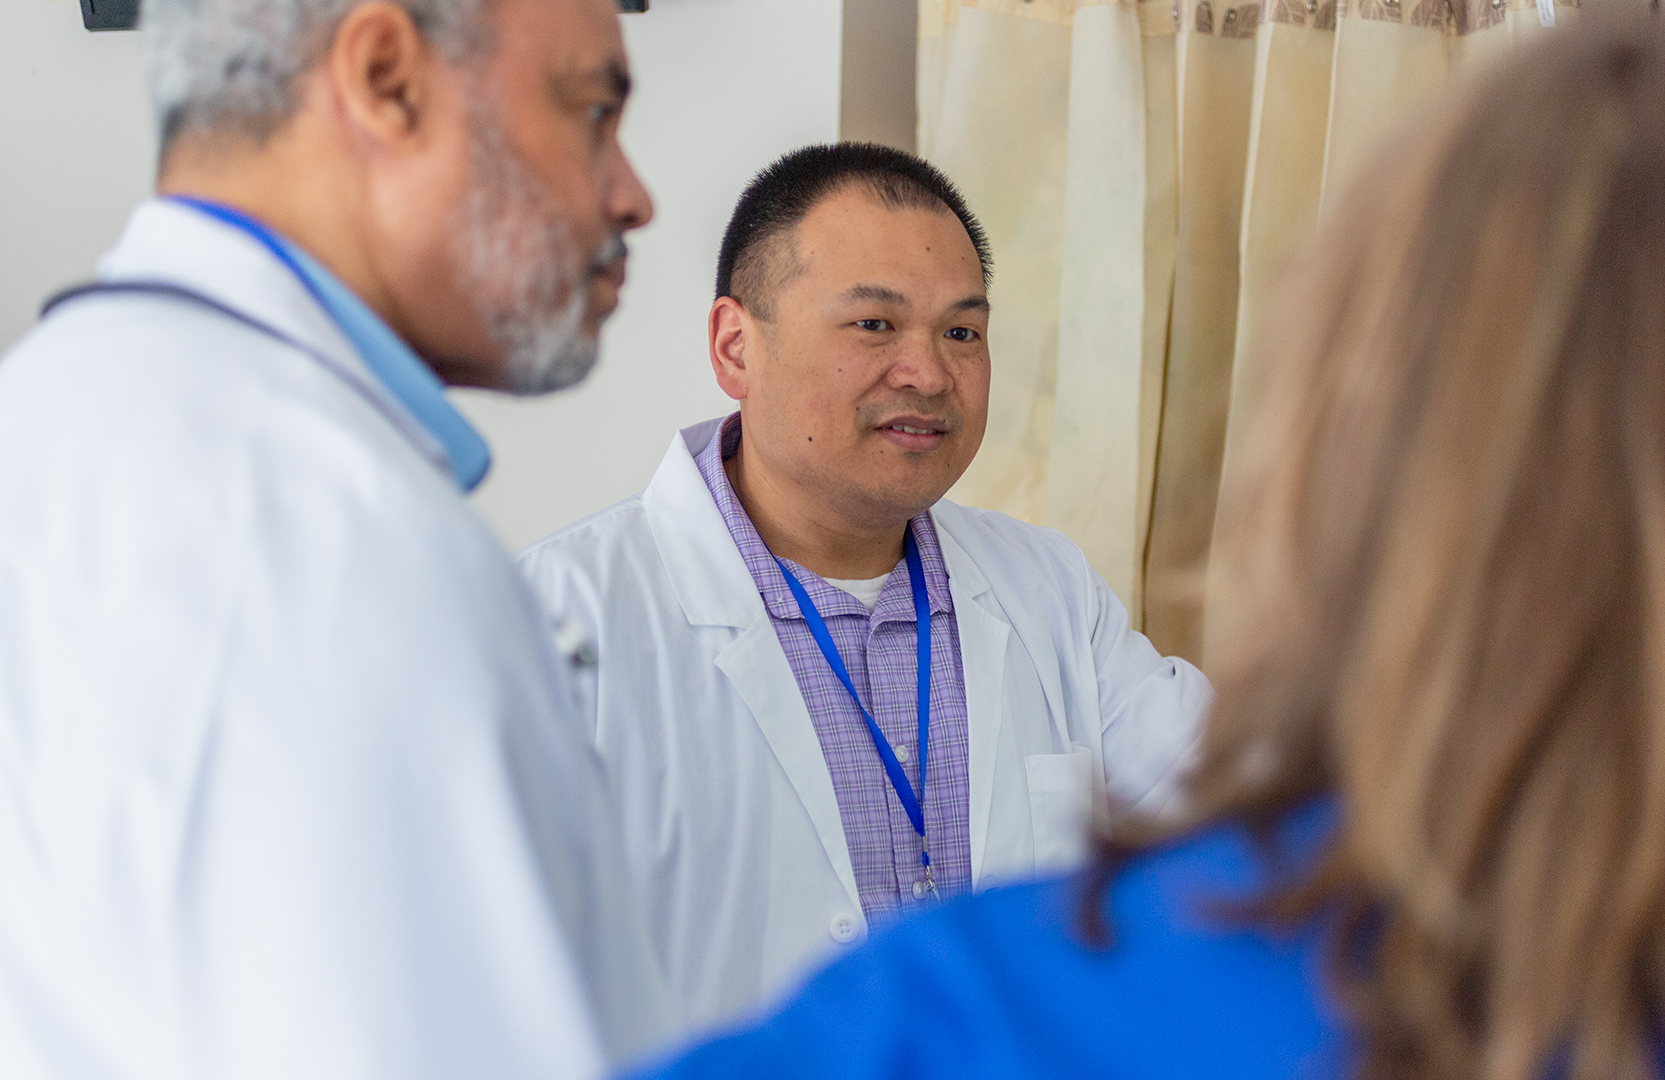 A health-system pharmacist speaking with other health care professionals. The pharmacist is an Asian man with short hair and wearing a white lab coat over a lavender dress shirt.